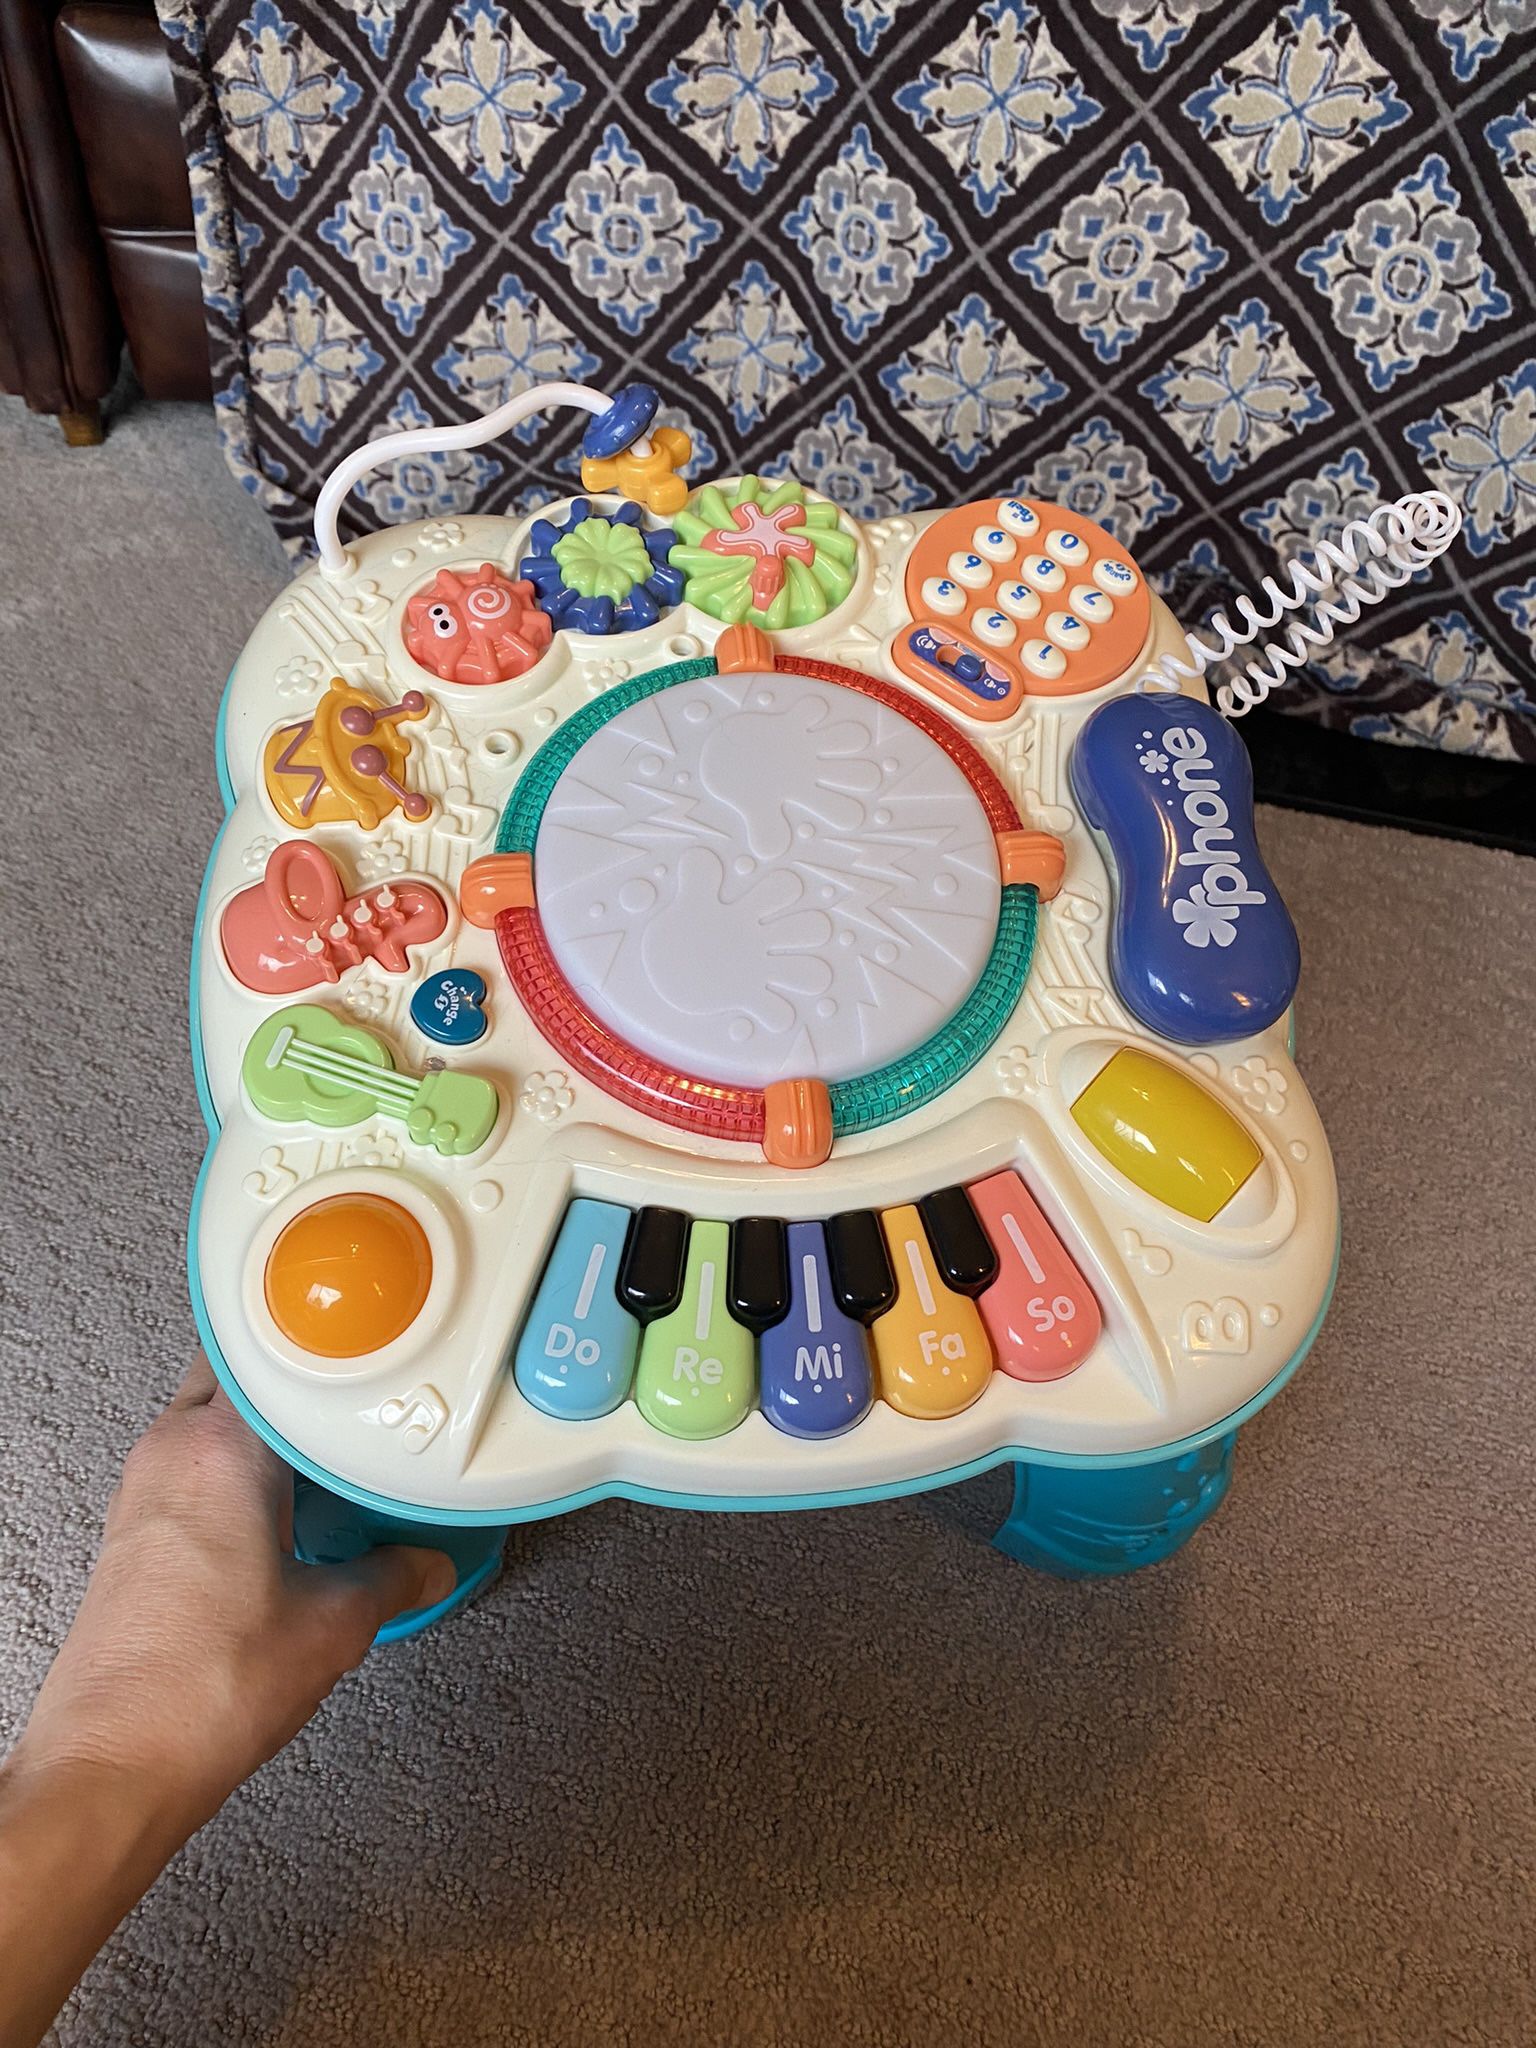 Baby Music Toy $10